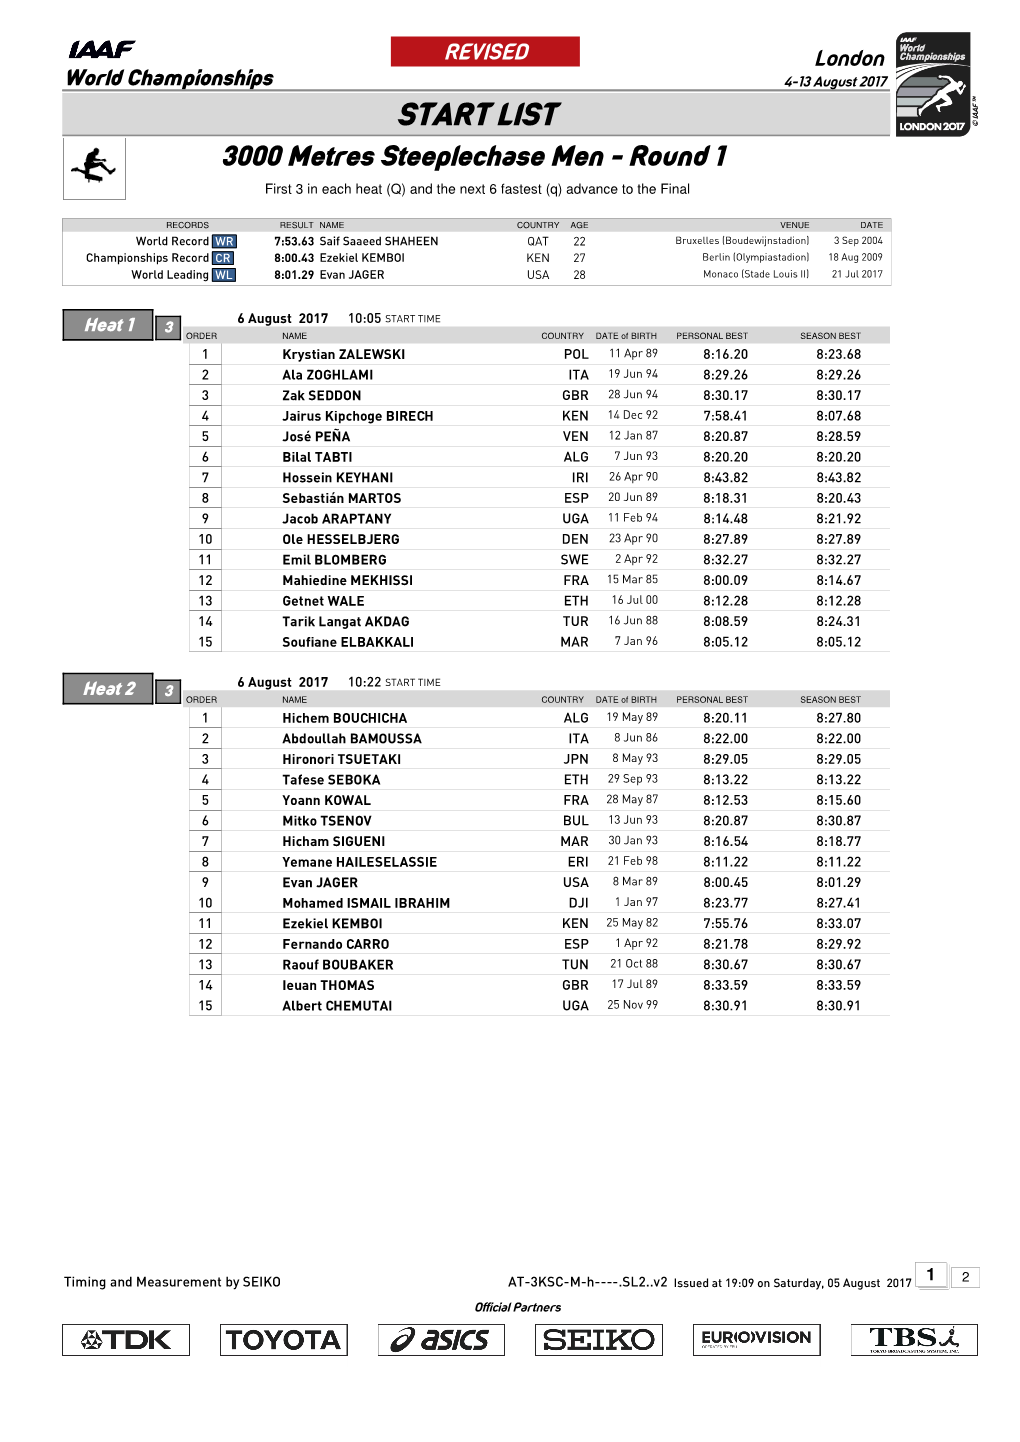 START LIST 3000 Metres Steeplechase Men - Round 1 First 3 in Each Heat (Q) and the Next 6 Fastest (Q) Advance to the Final